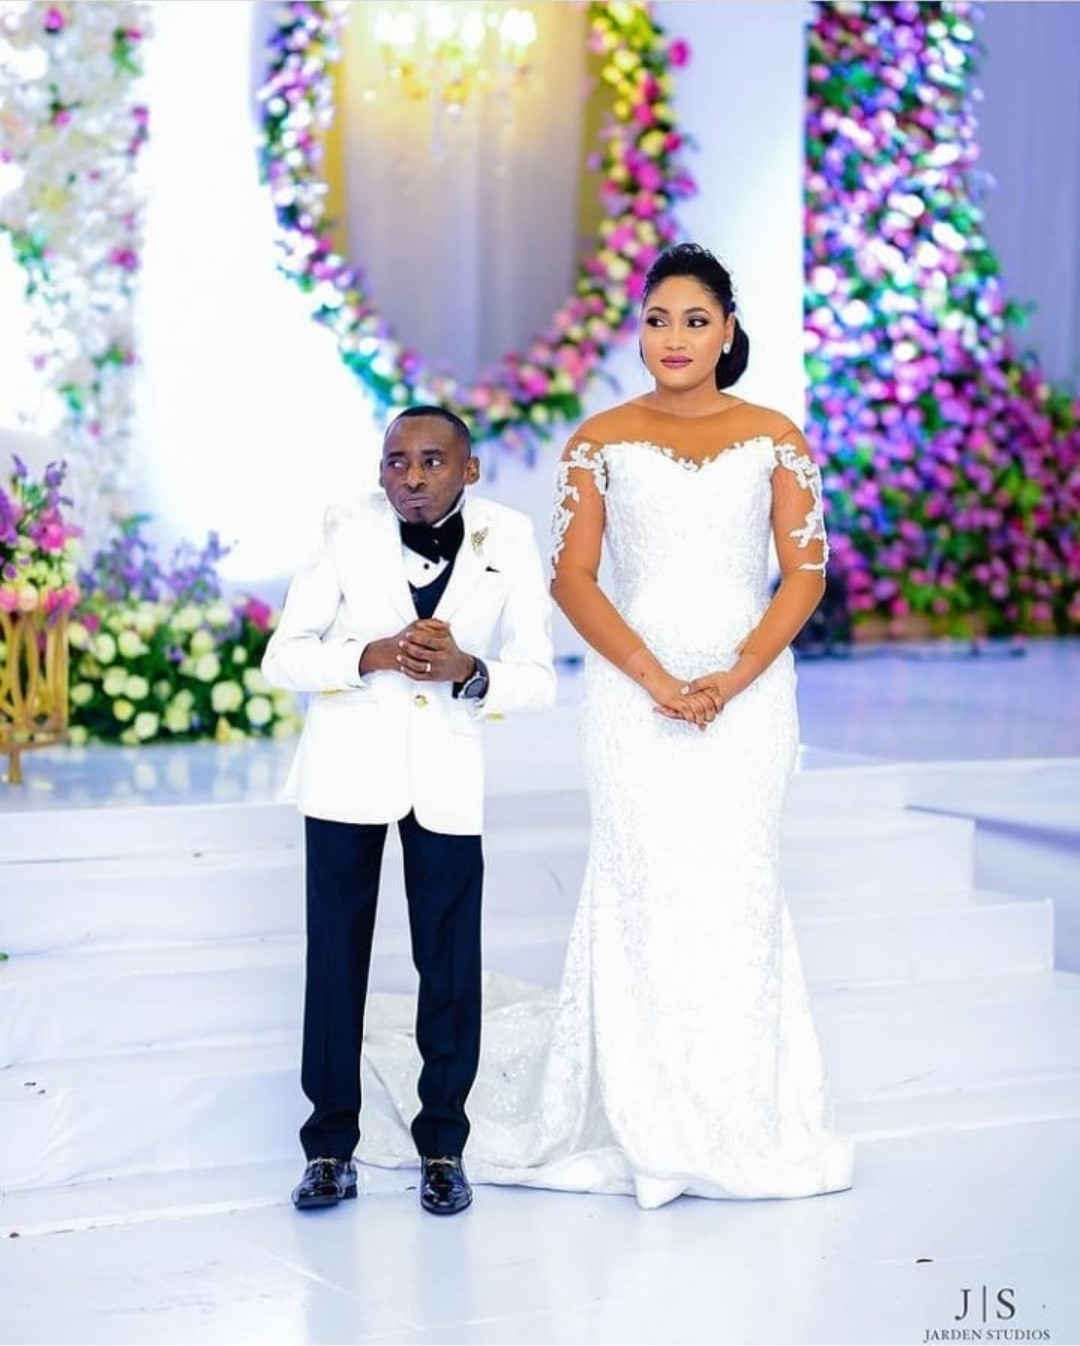 Tanzanian politician, Petro Magoti, hails his new wife, Joyce, on IG after tying the knot (photos)